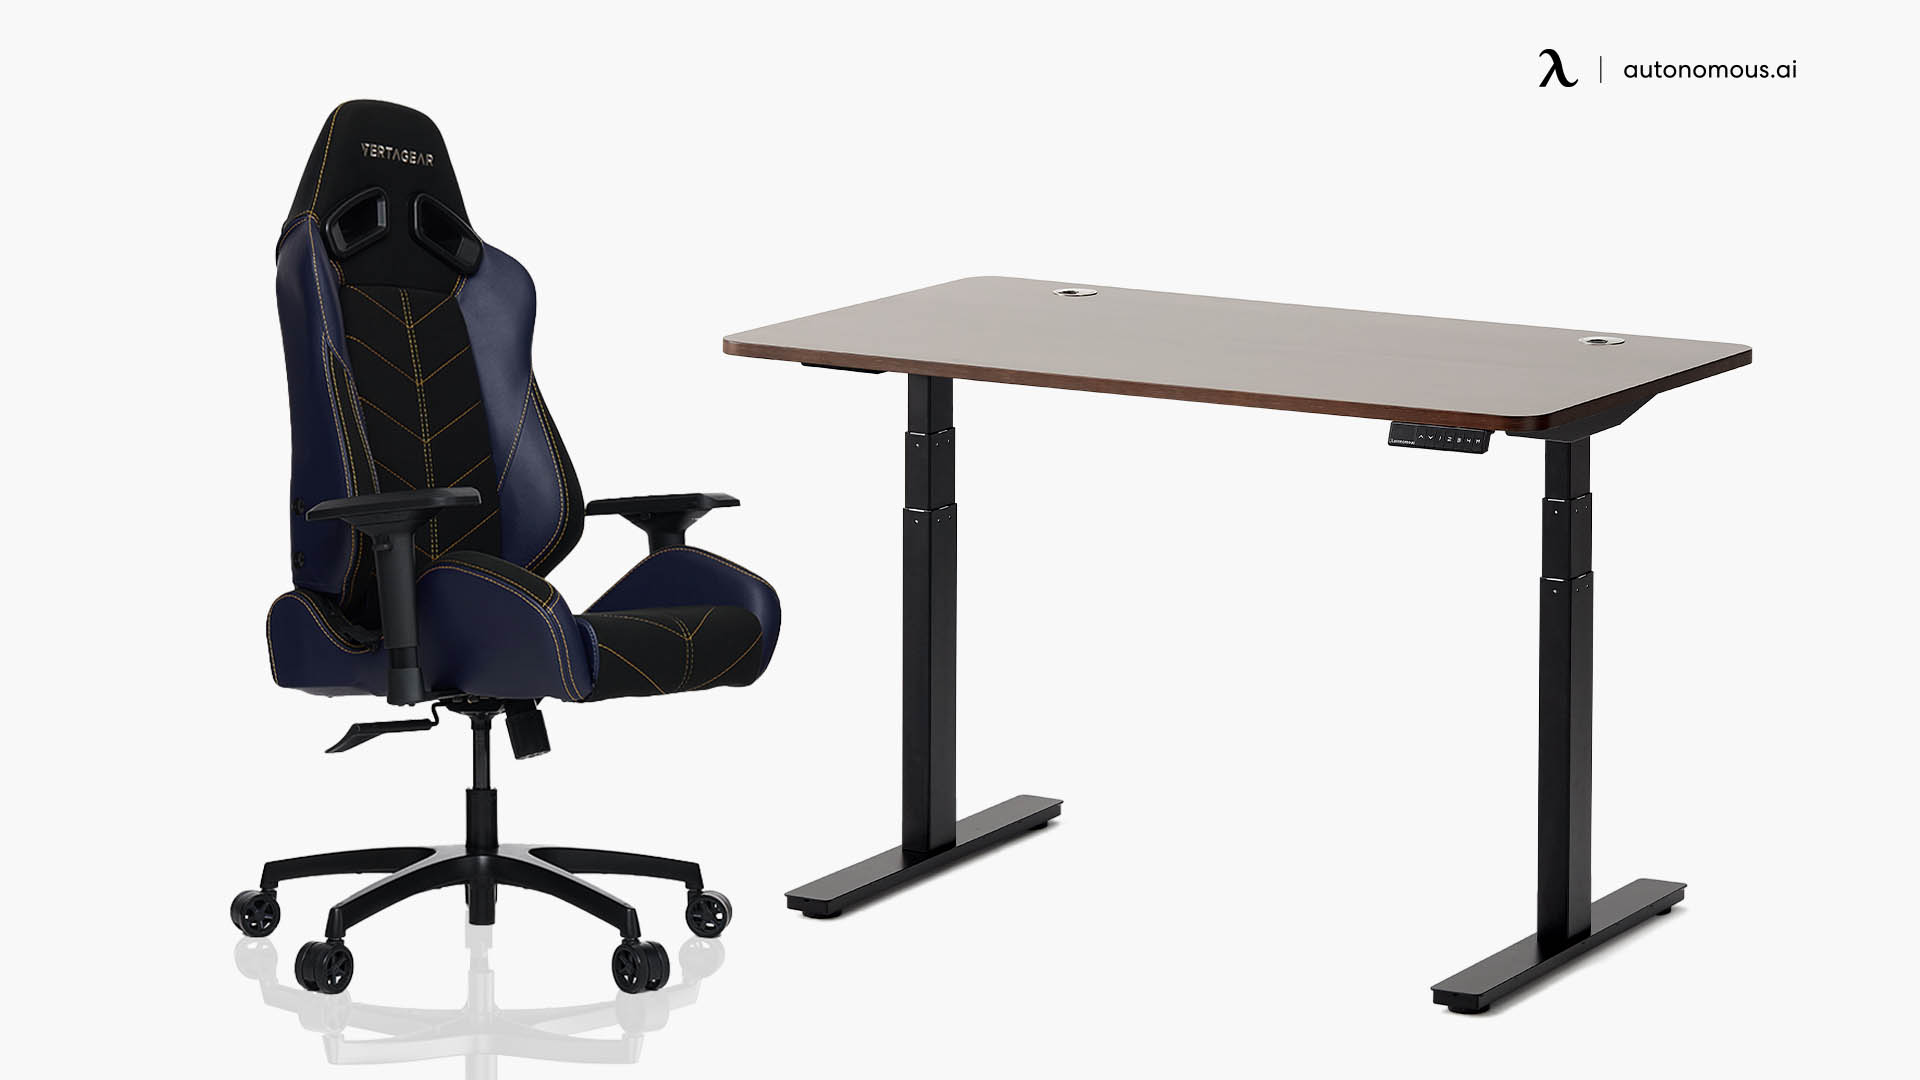 SmartDesk Pro and Vertagear SL4000 gaming chair and table